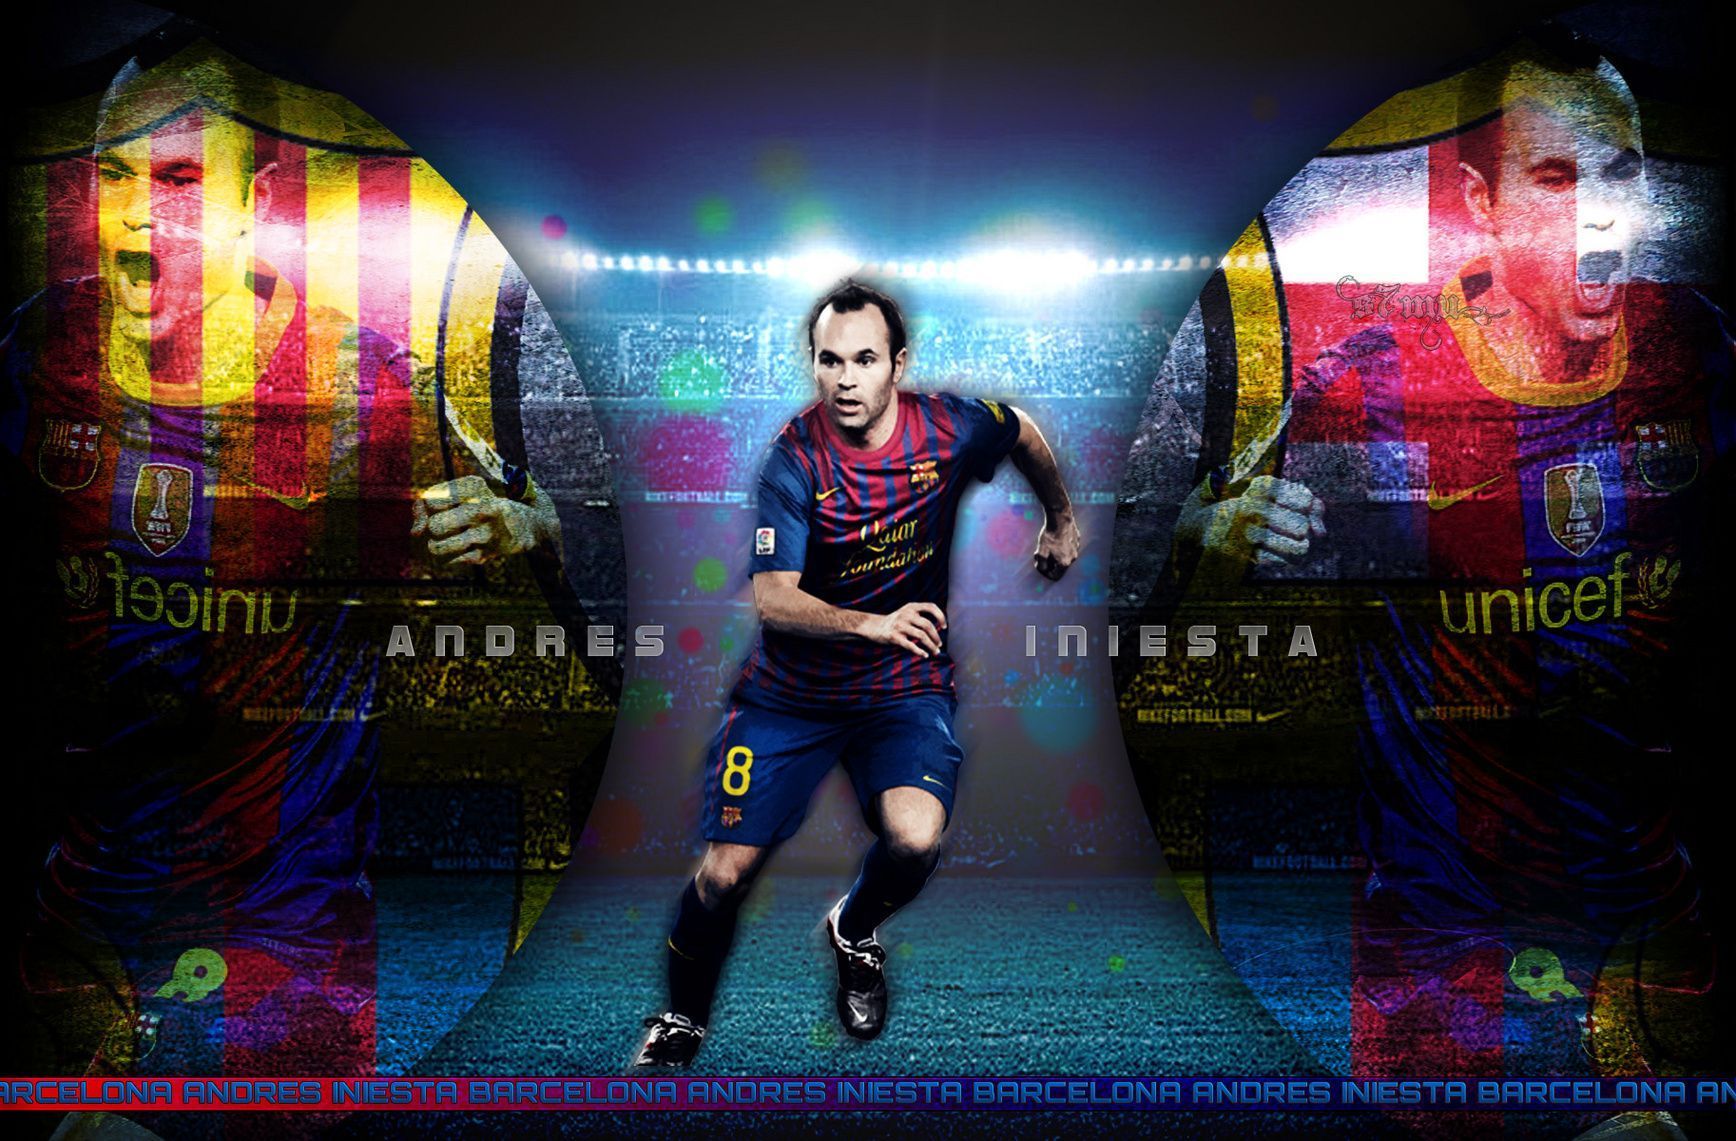 The midfielder of Barcelona Andres Iniesta wallpapers and images